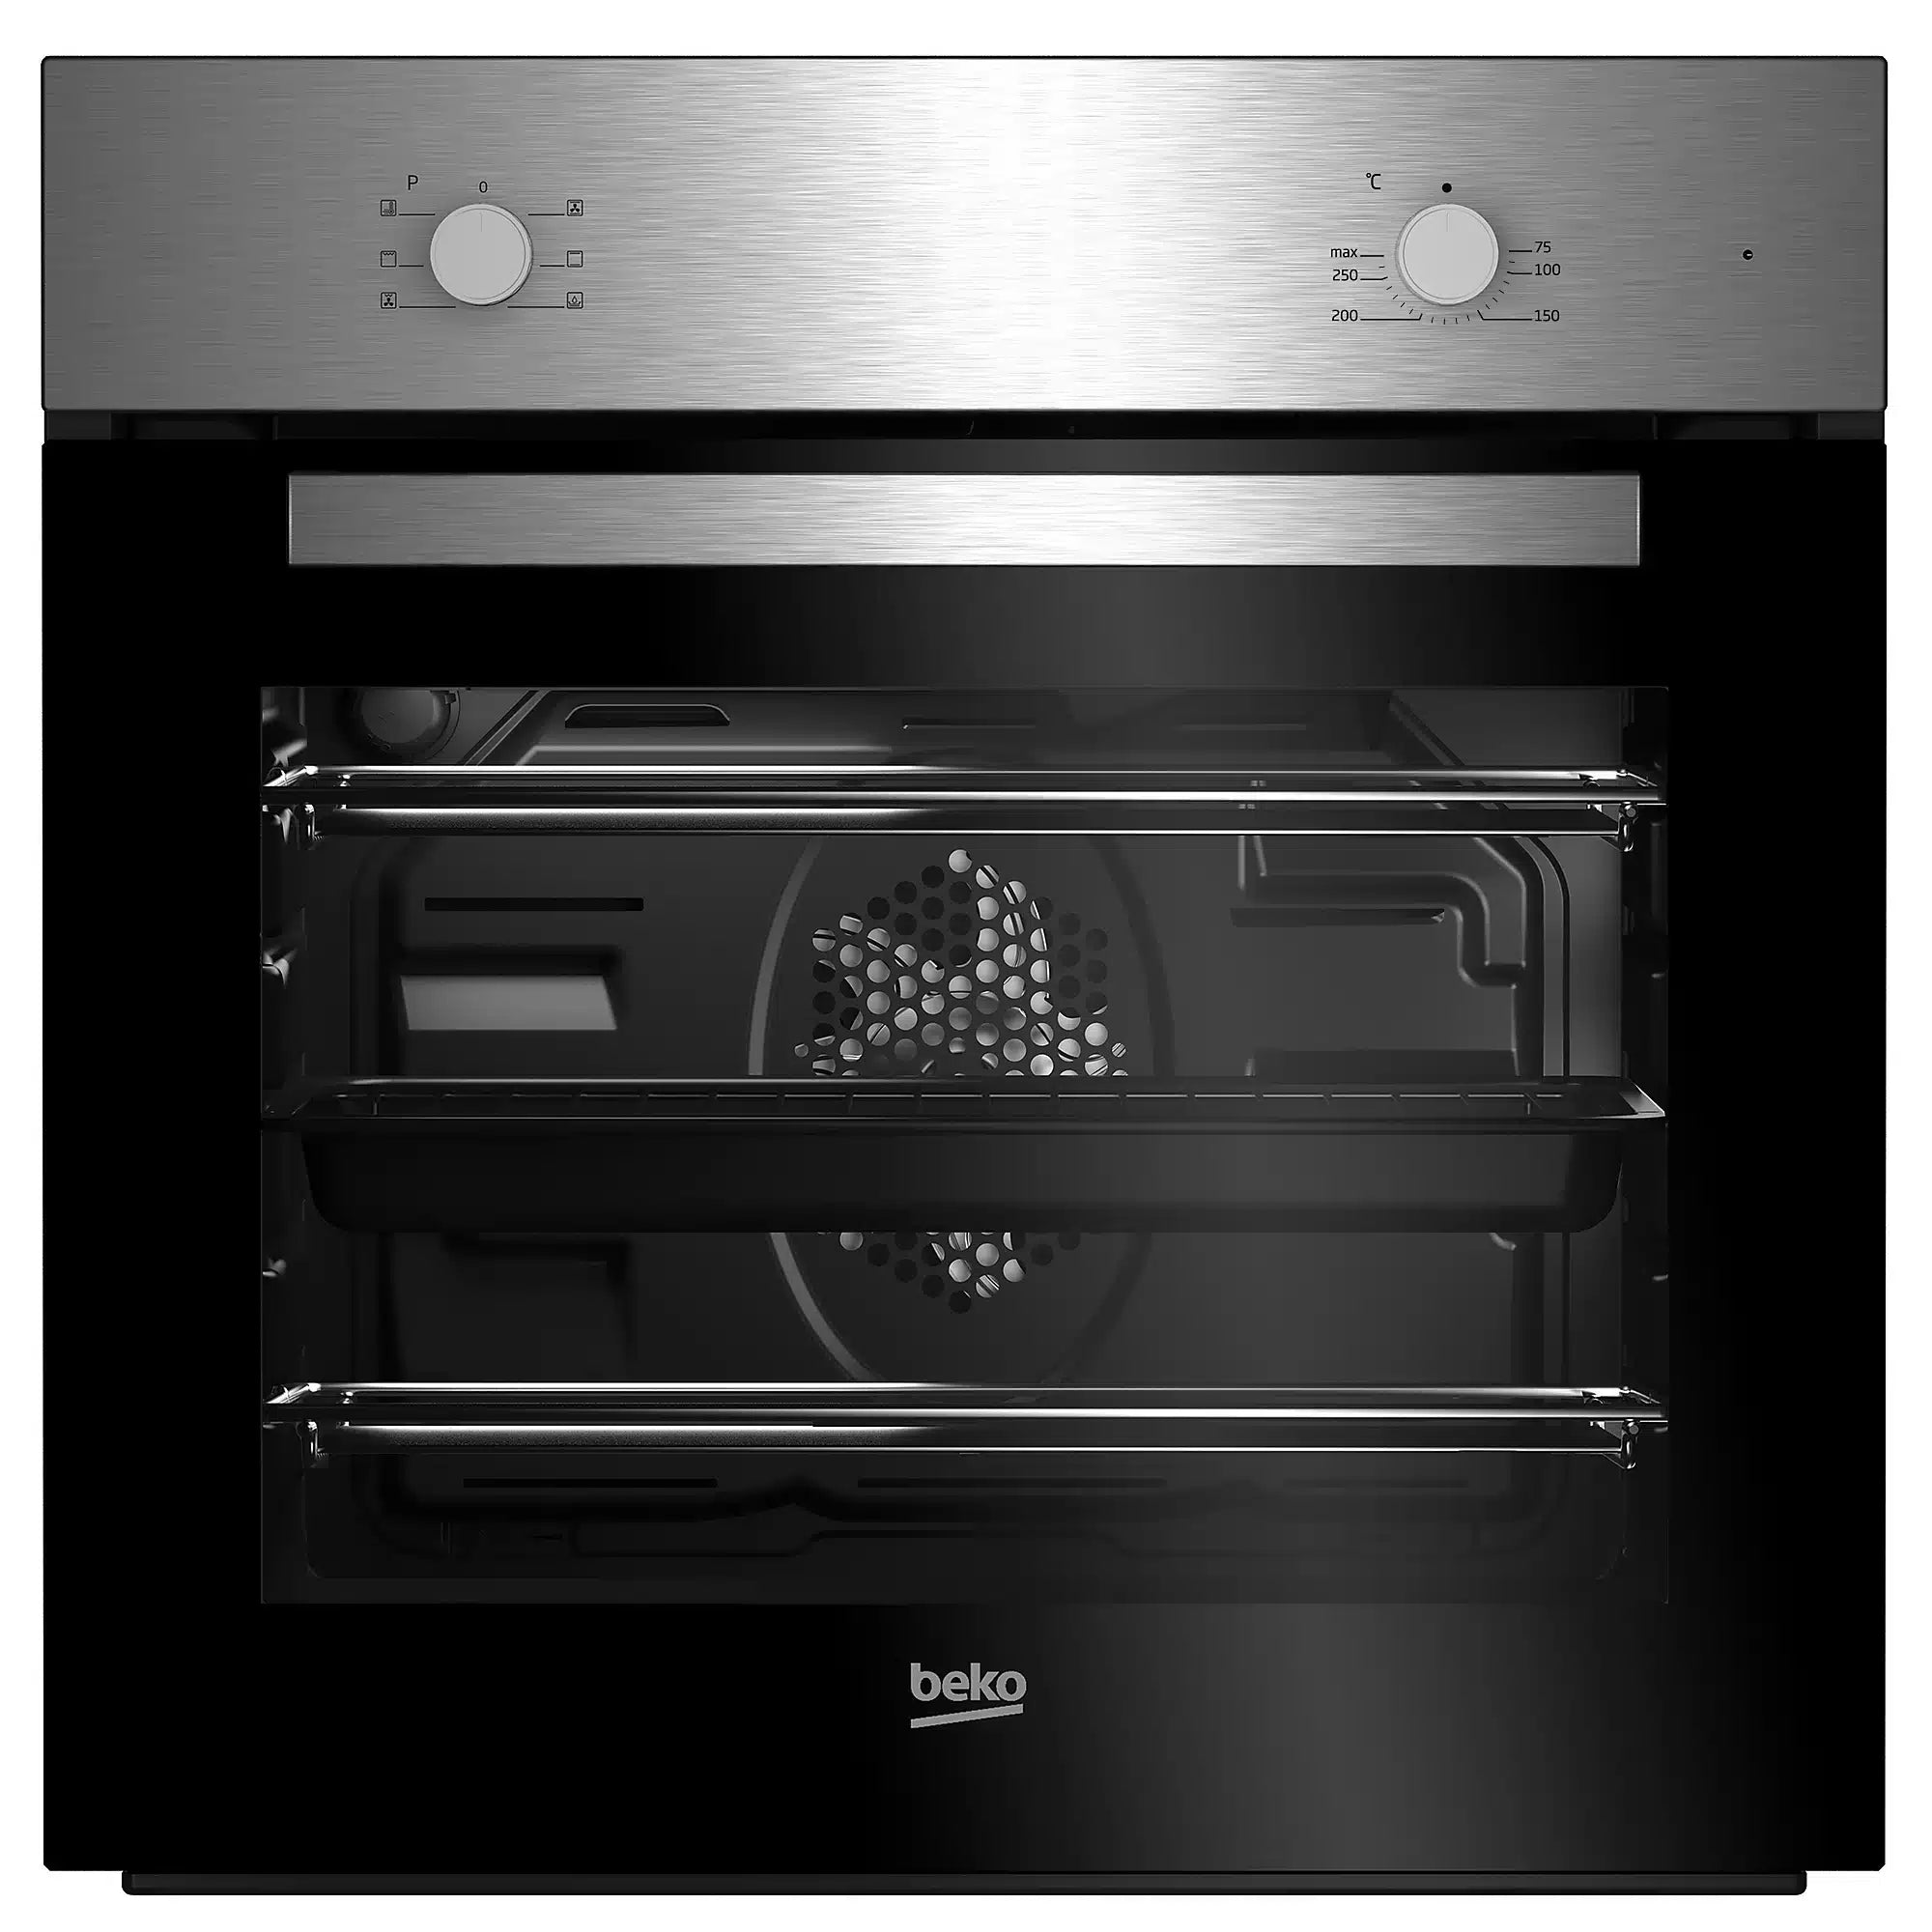 Beko Single Oven & Hob Stainless Steel Built-in Electric QSE222X 7877